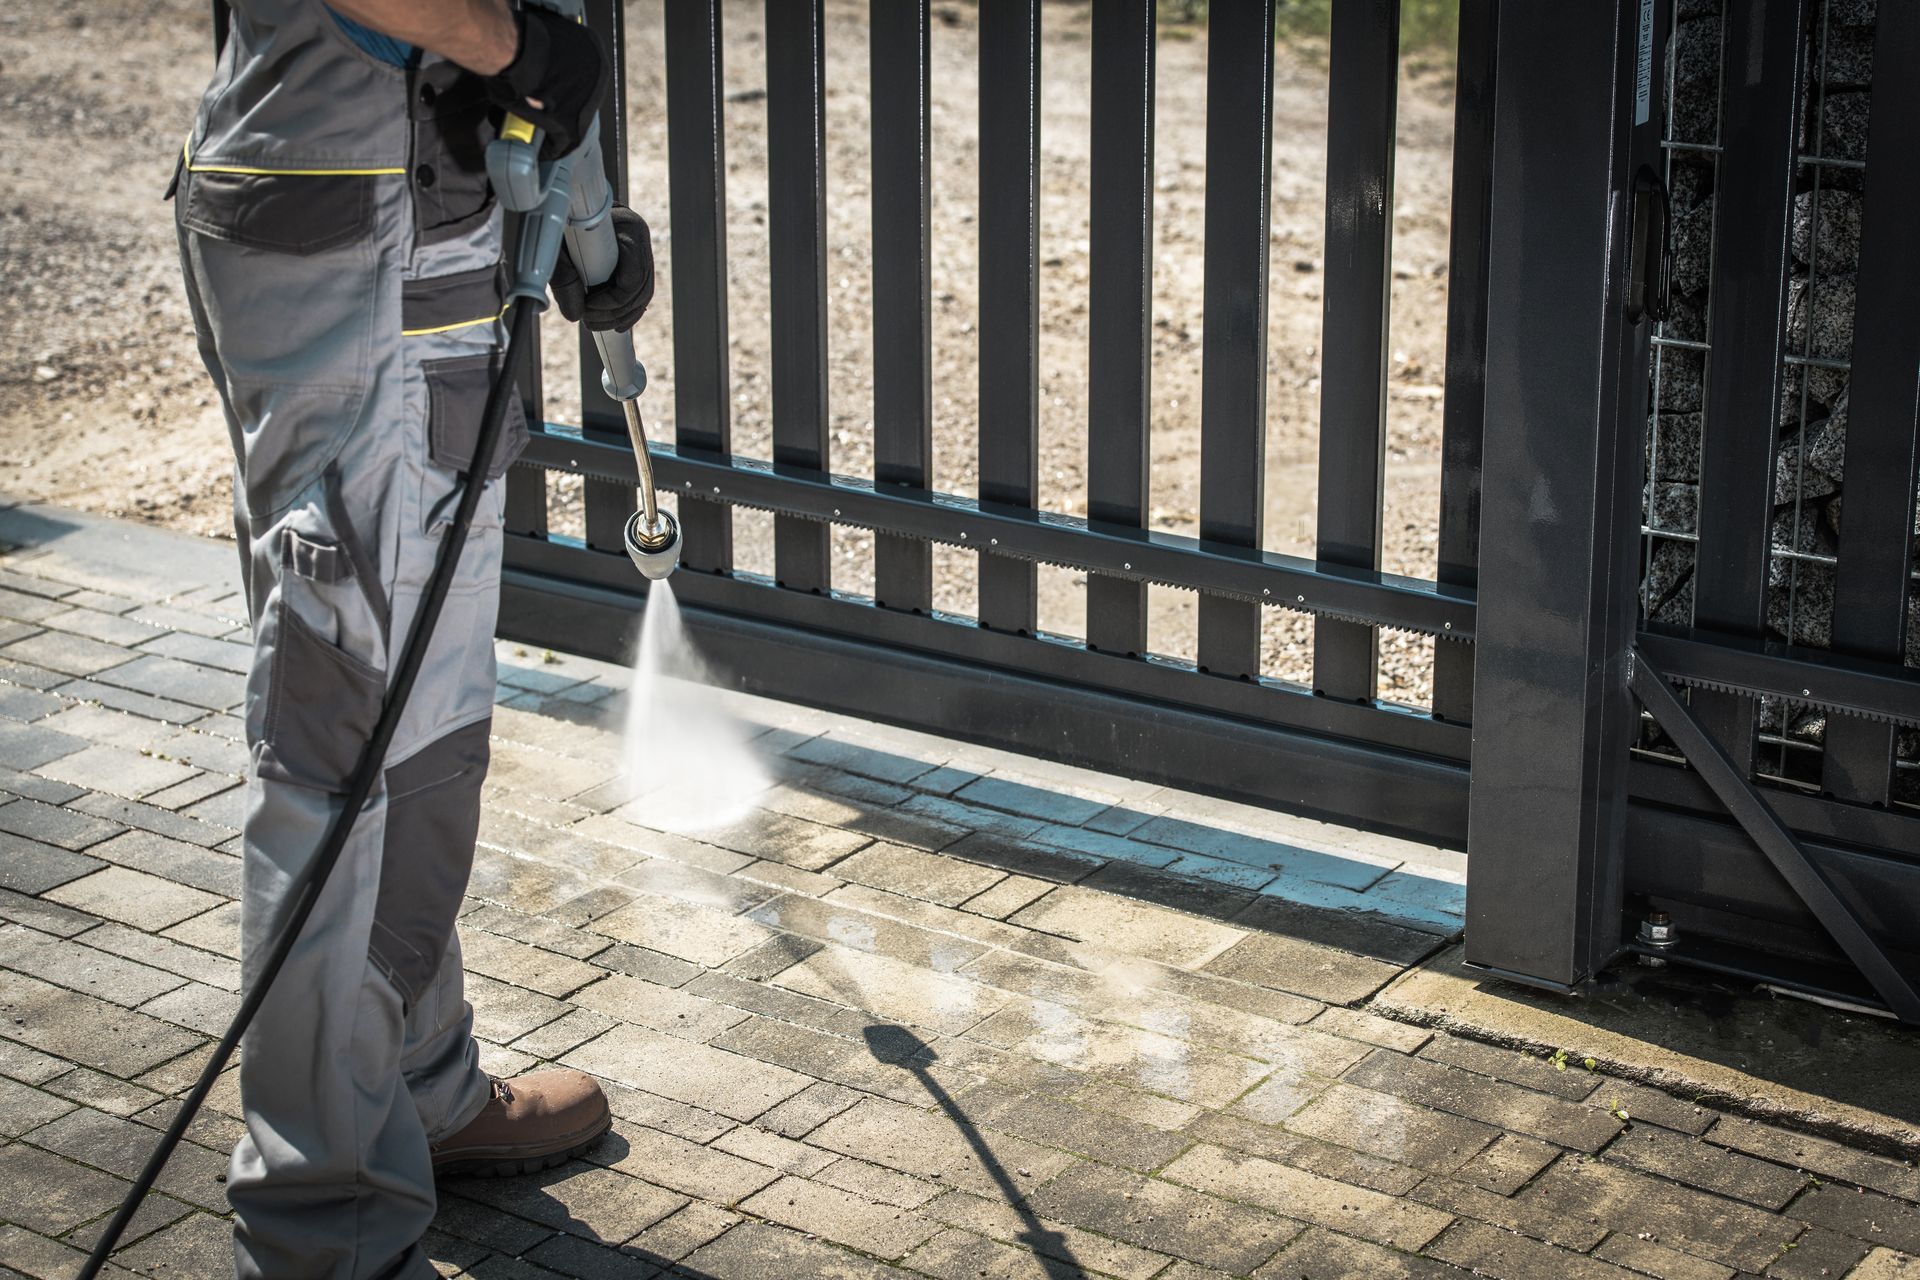 A man is using a high pressure washer to clean a gate.